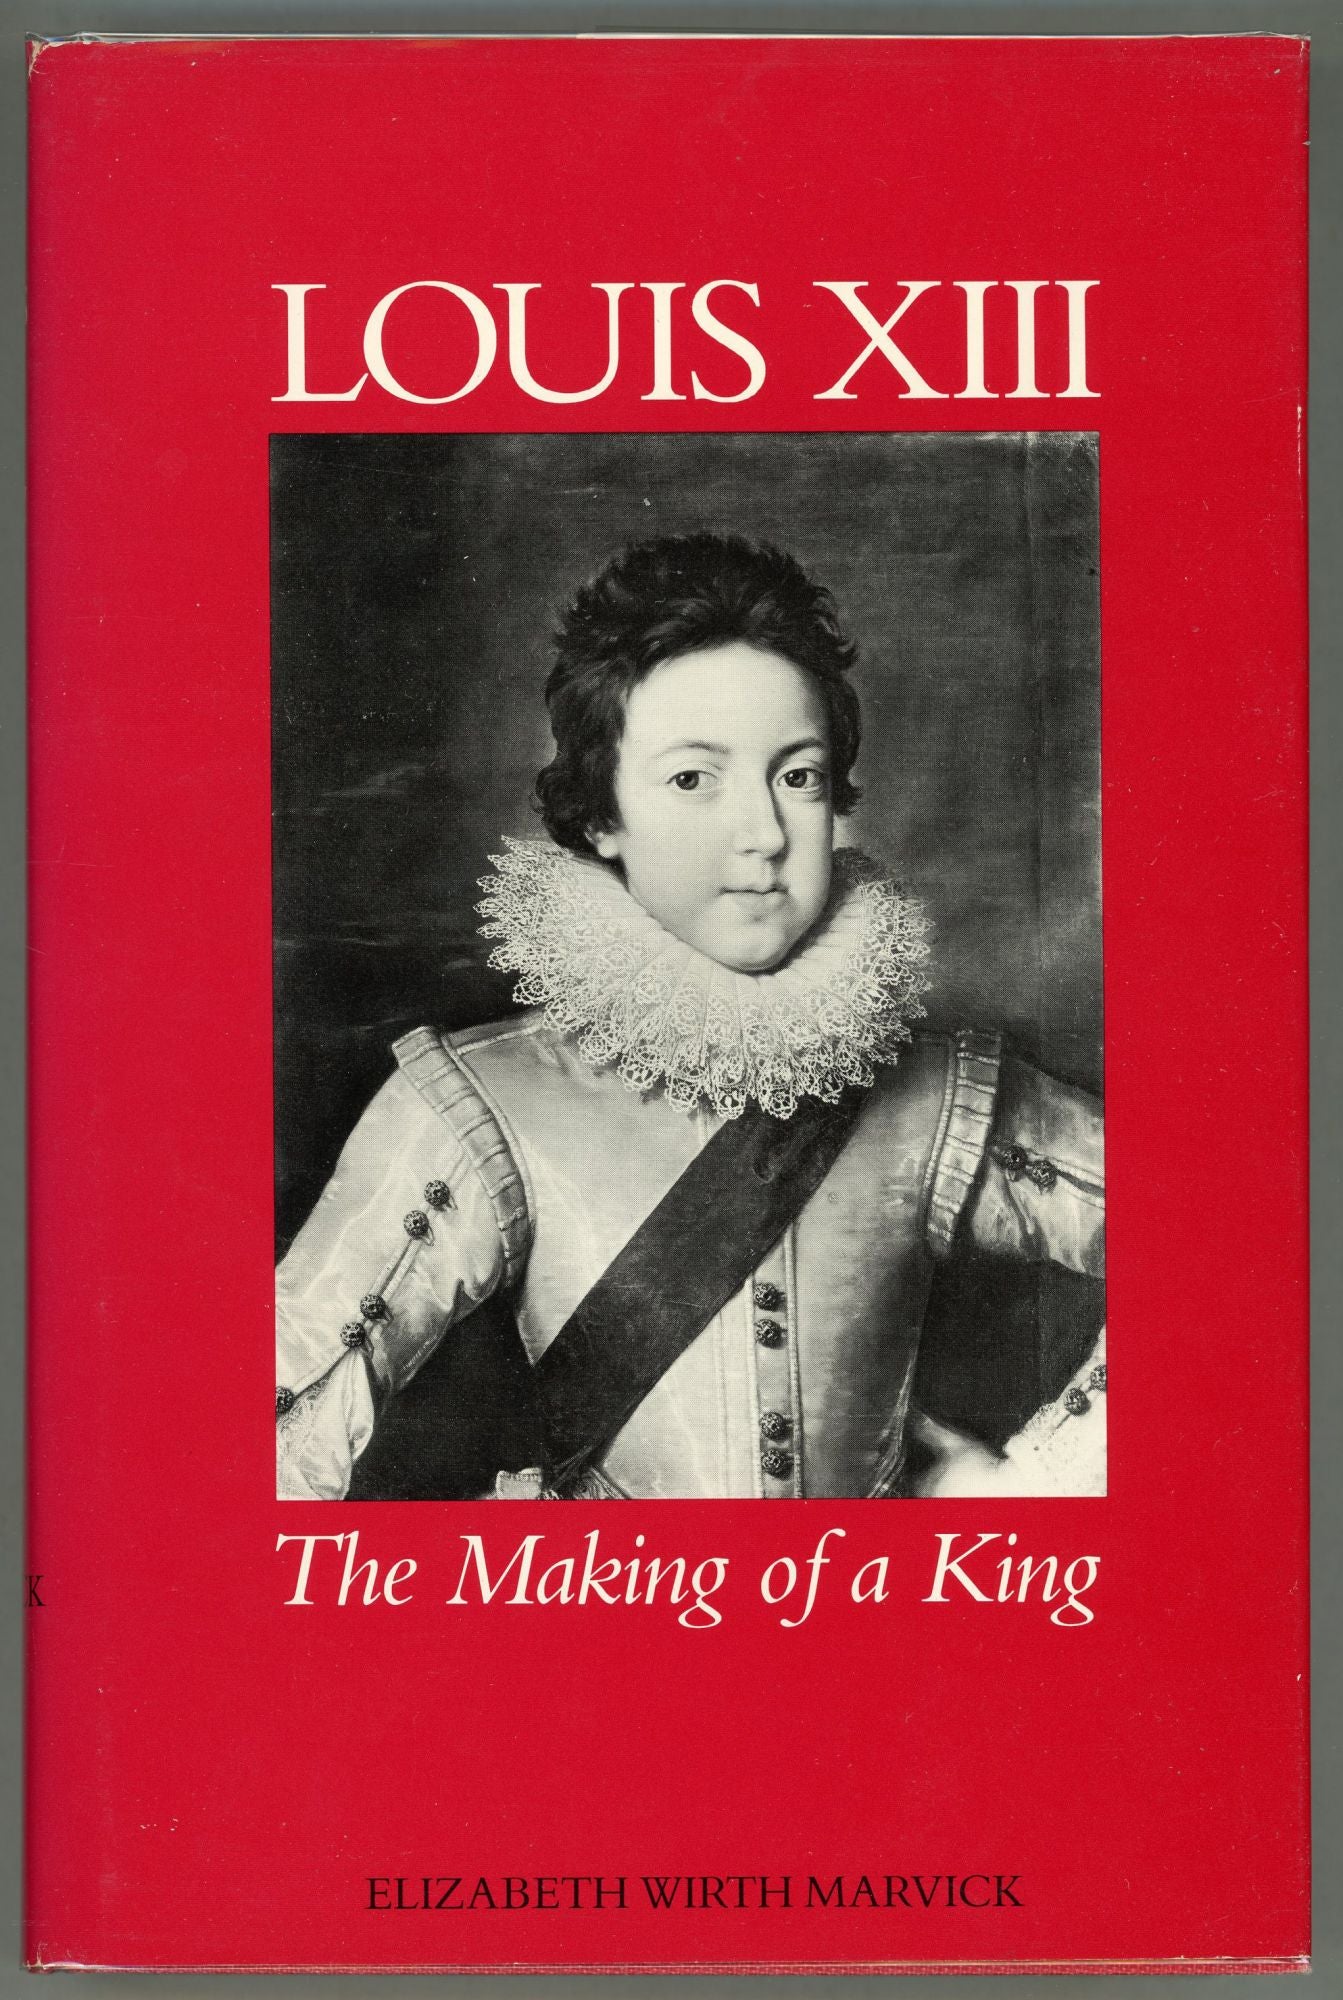 Louis Xiii: The Making of a King